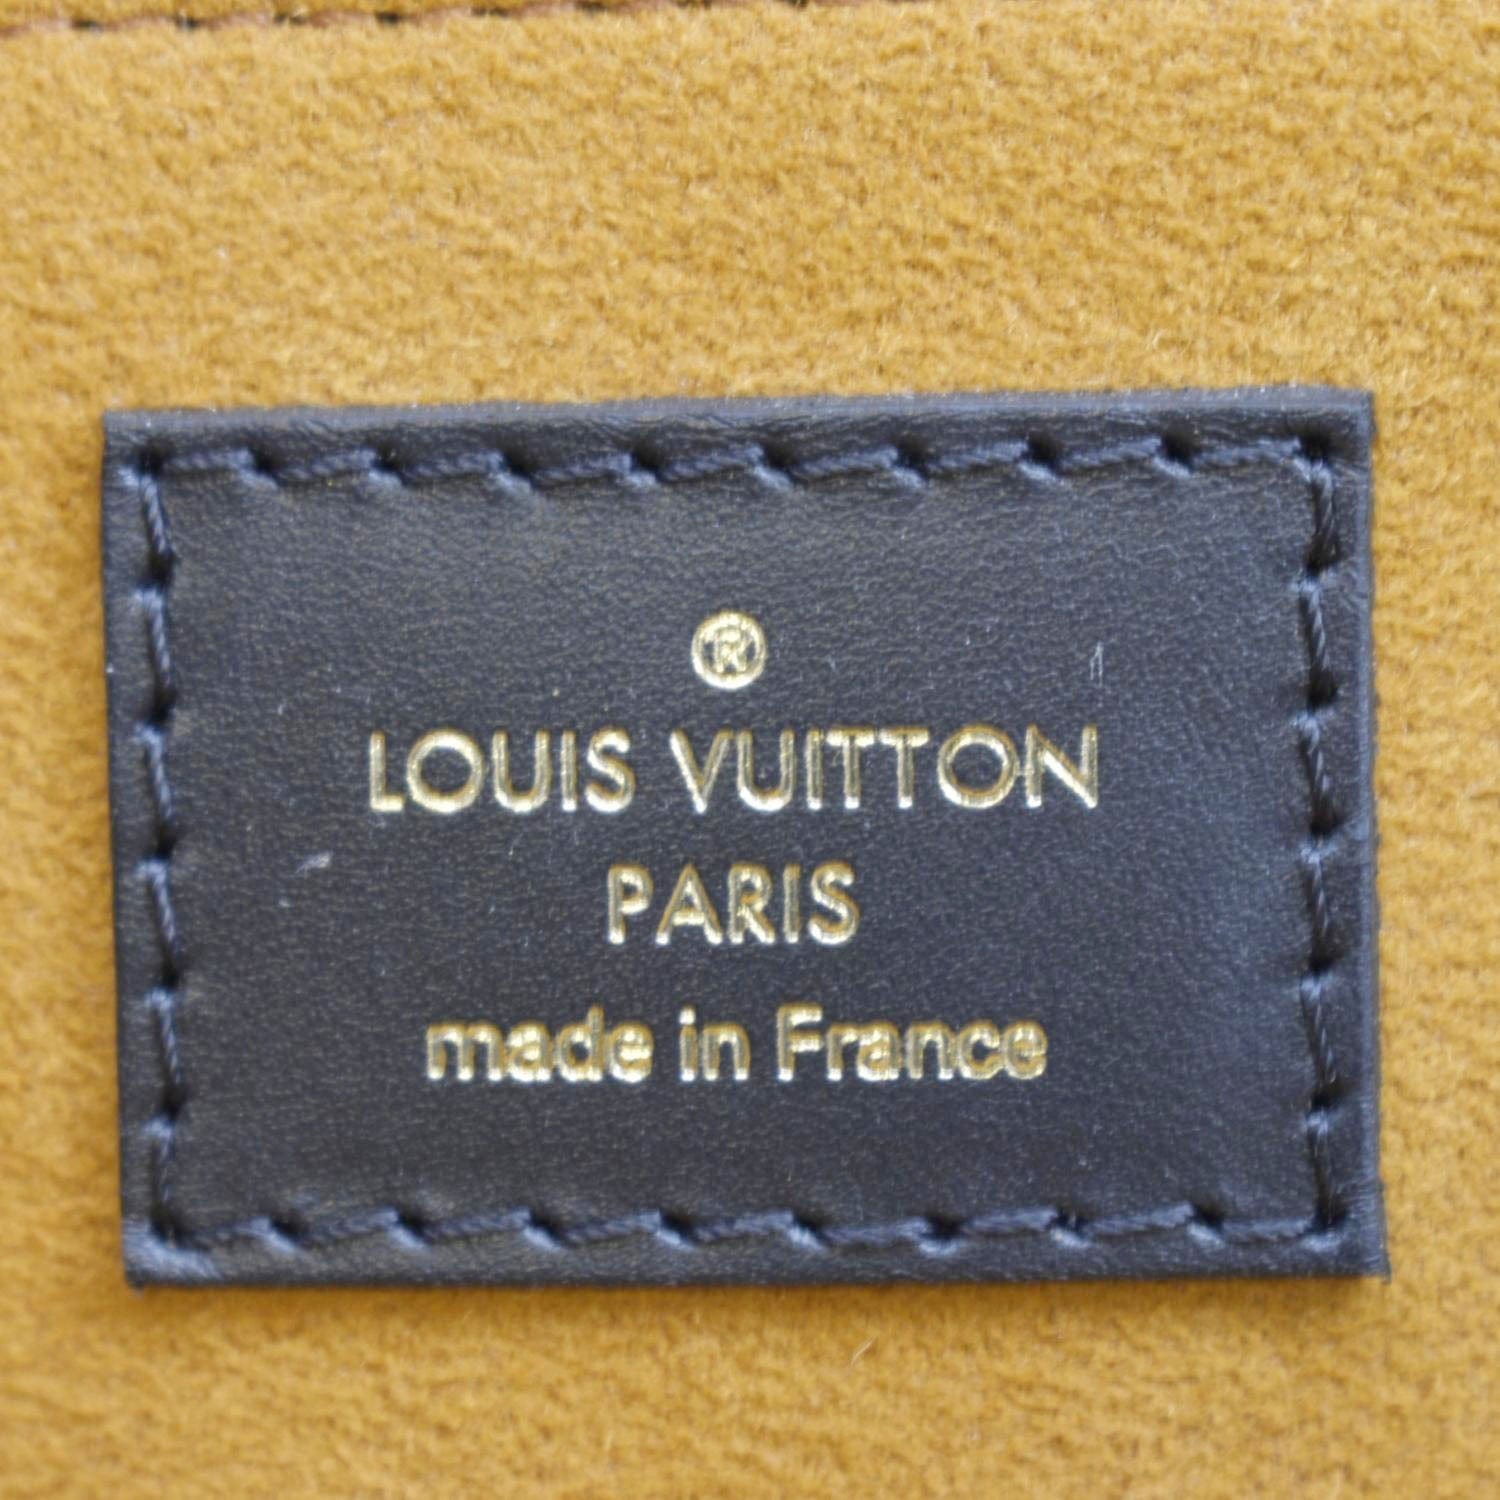 louis vuitton made in france real or fake